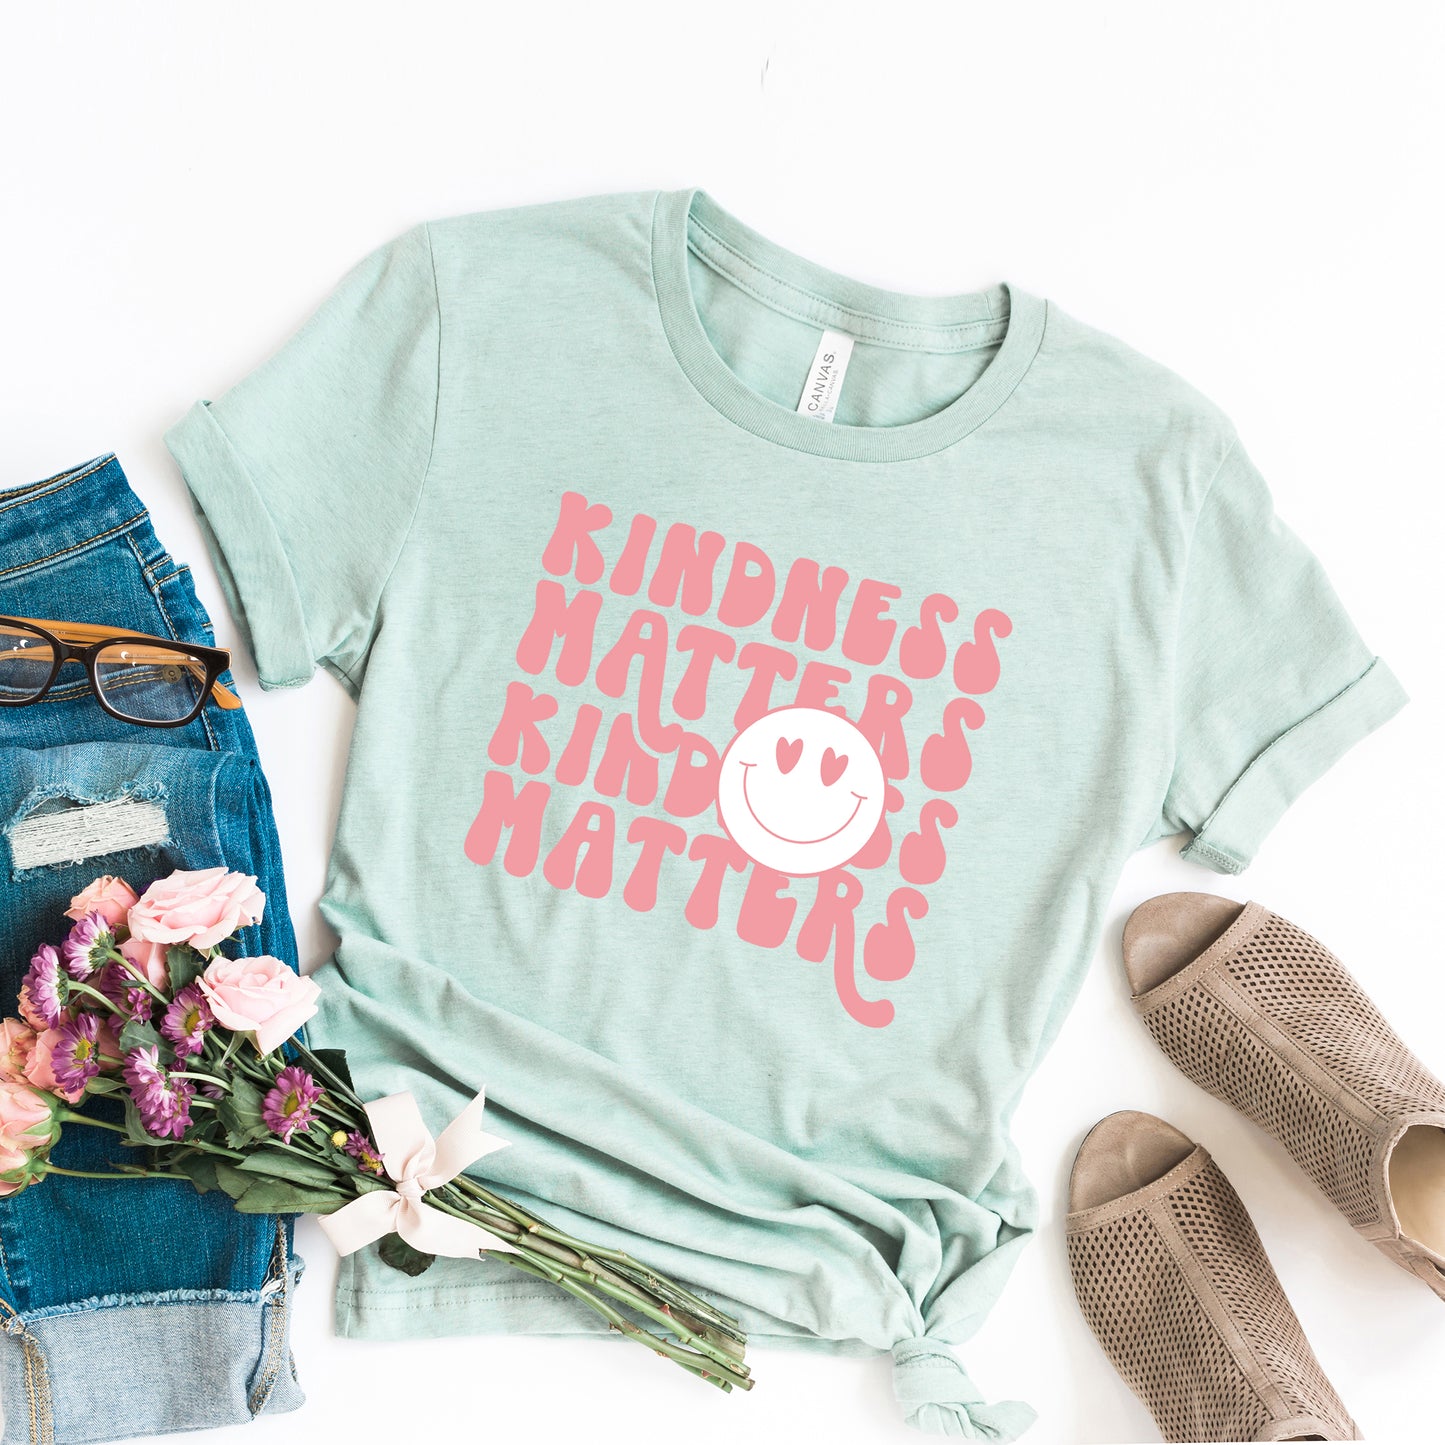 Kindness Matters Smiley Face | Short Sleeve Graphic Tee